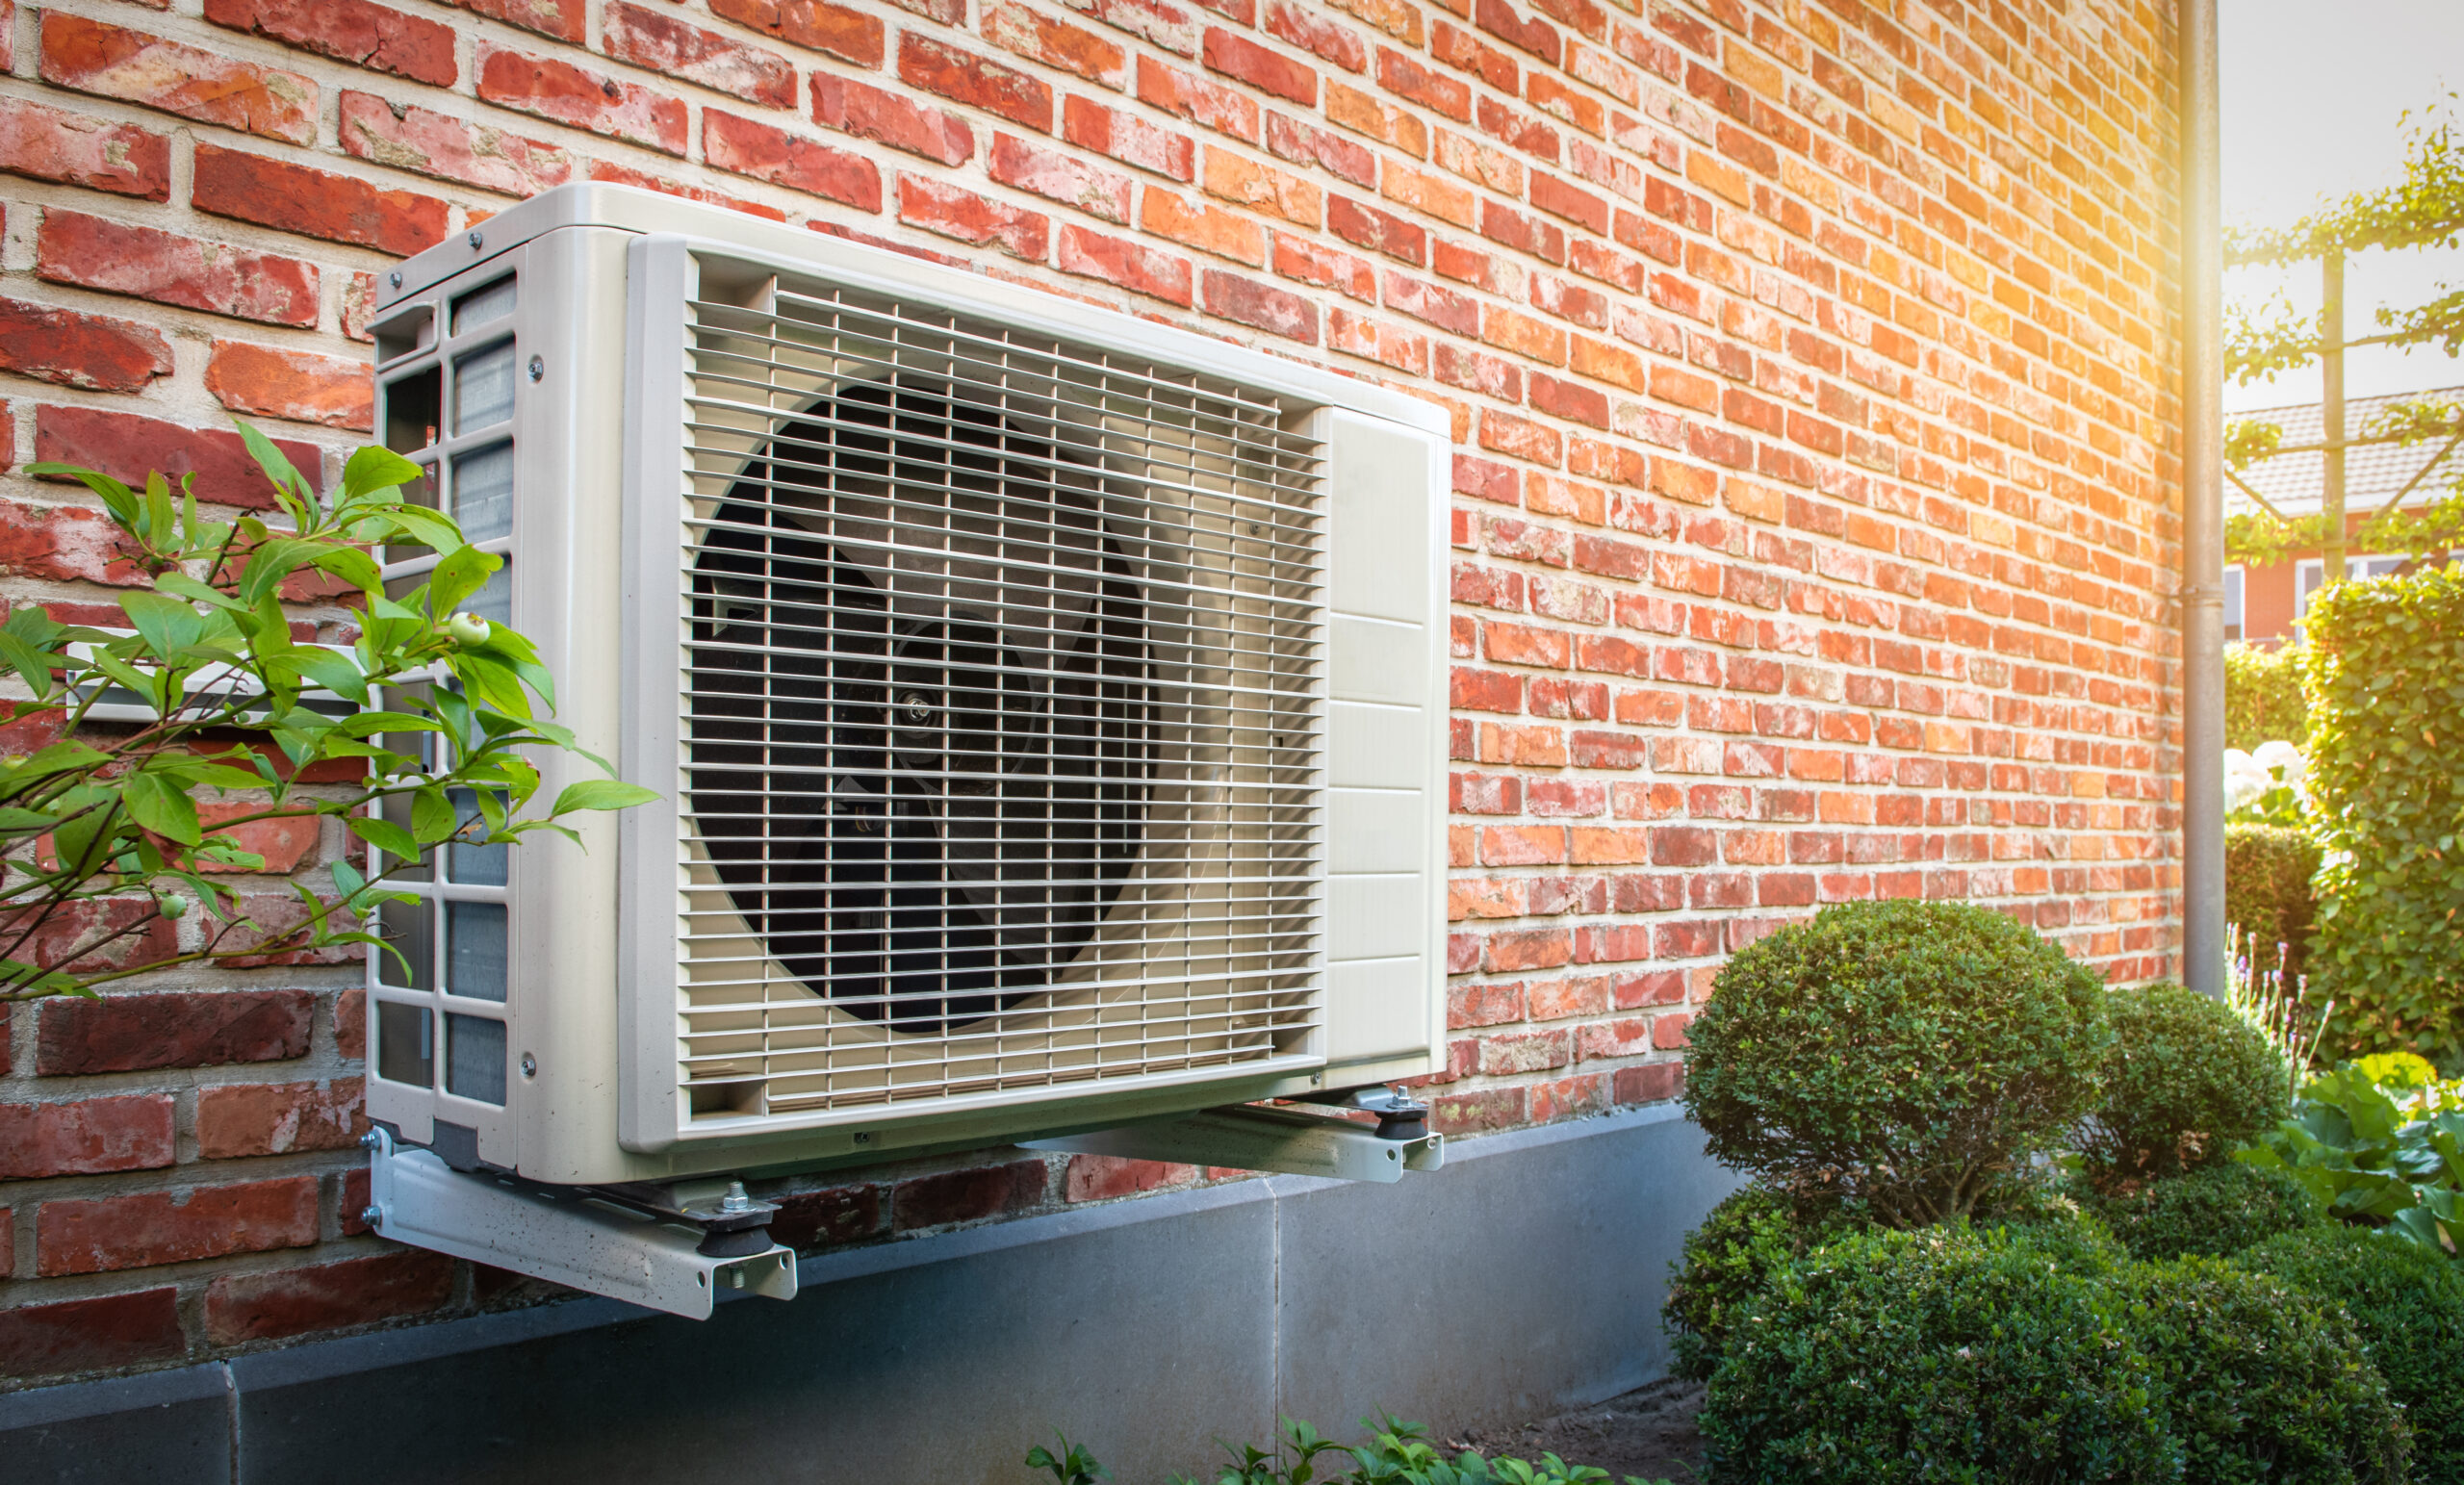 Increase Your Home’s Energy Efficiency by Switching to a Heat Pump